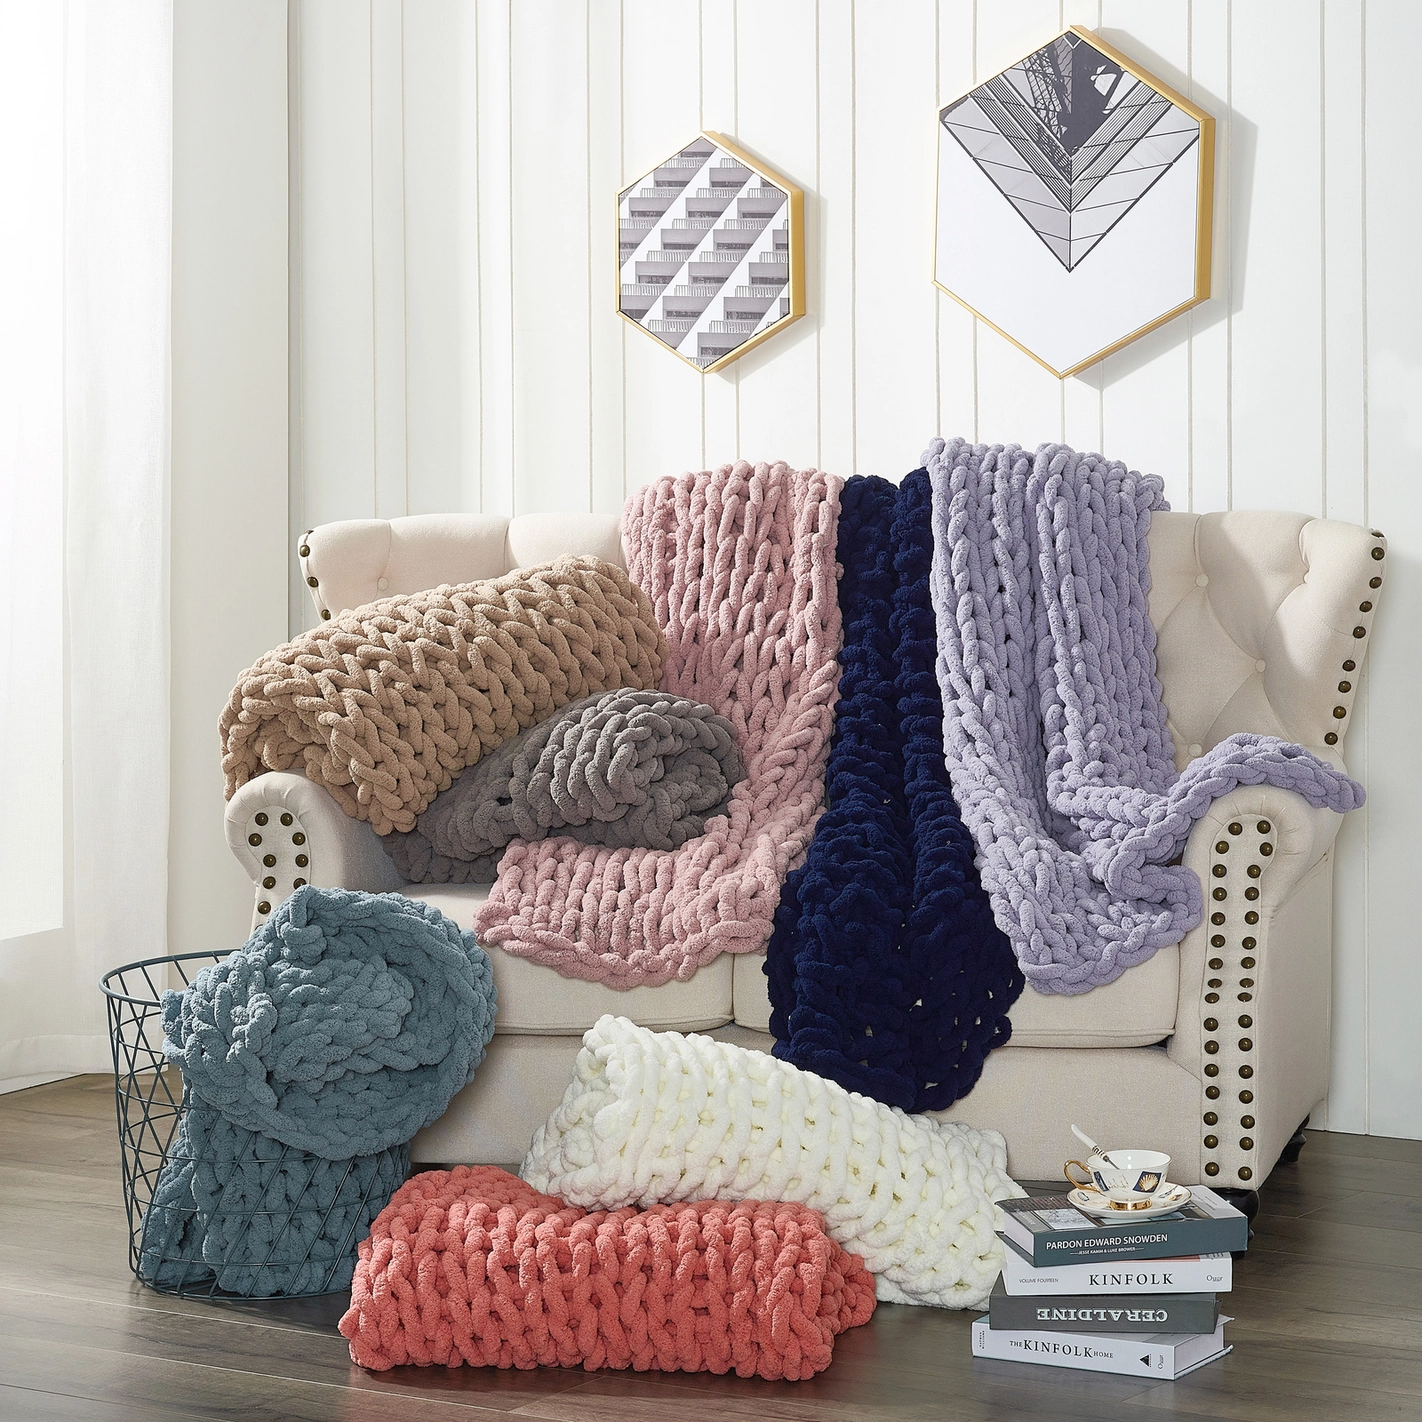 Chenille Chunky Knit Throws - Home Works